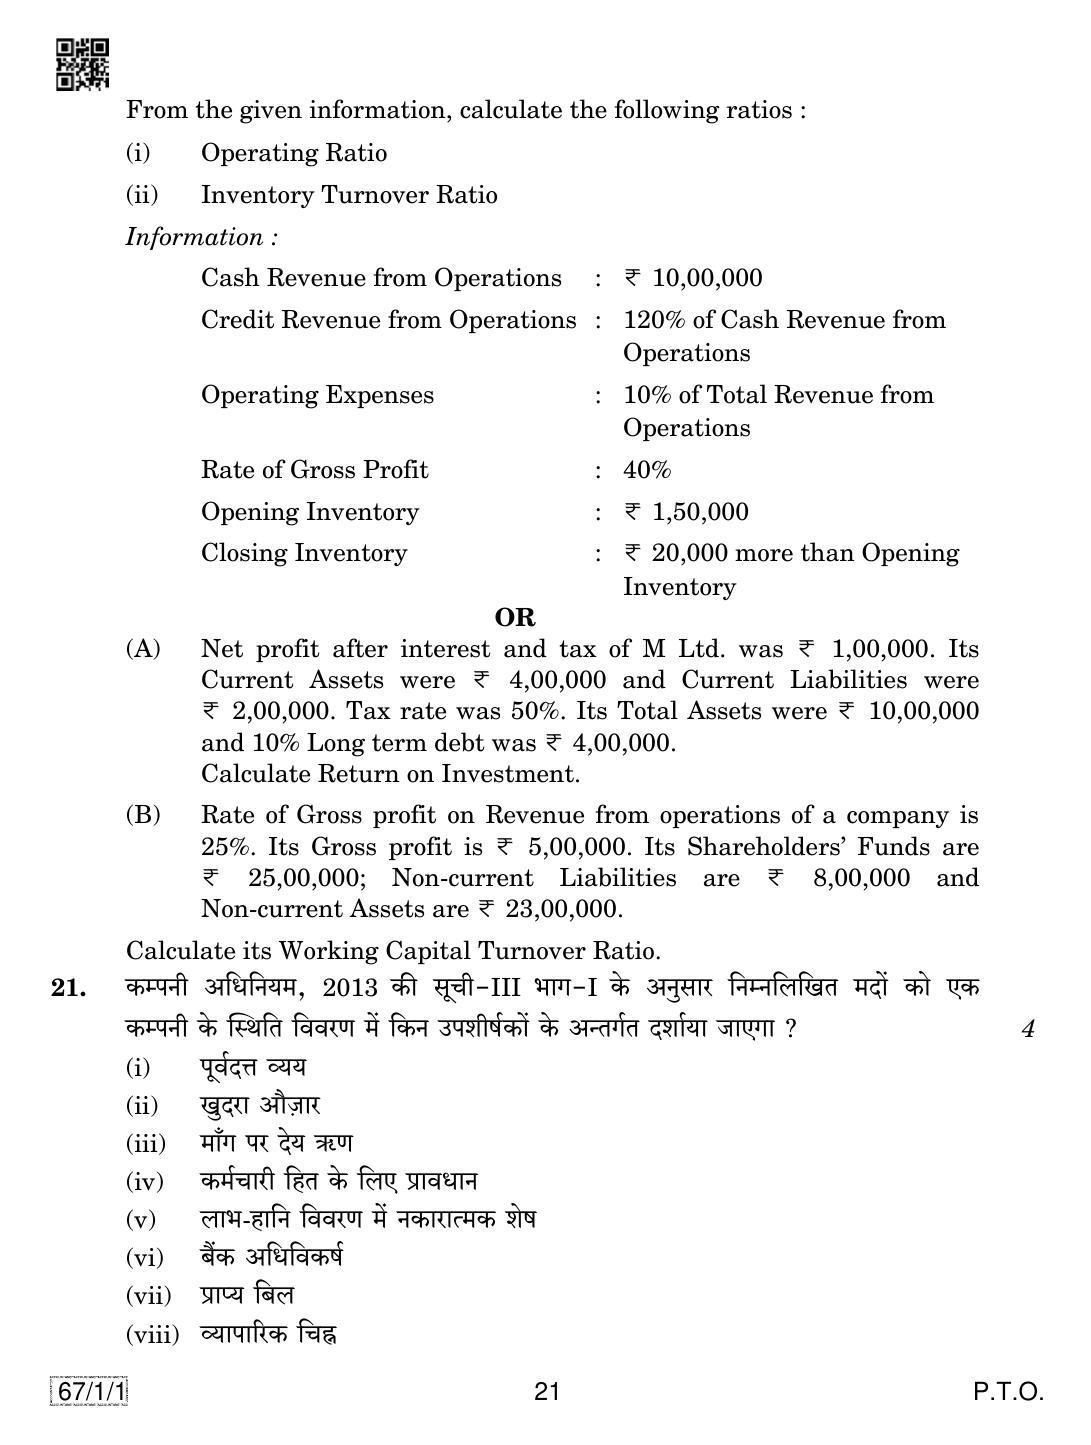 CBSE Class 12 67-1-1 ACCOUNTANCY 2019 Compartment Question Paper - Page 21